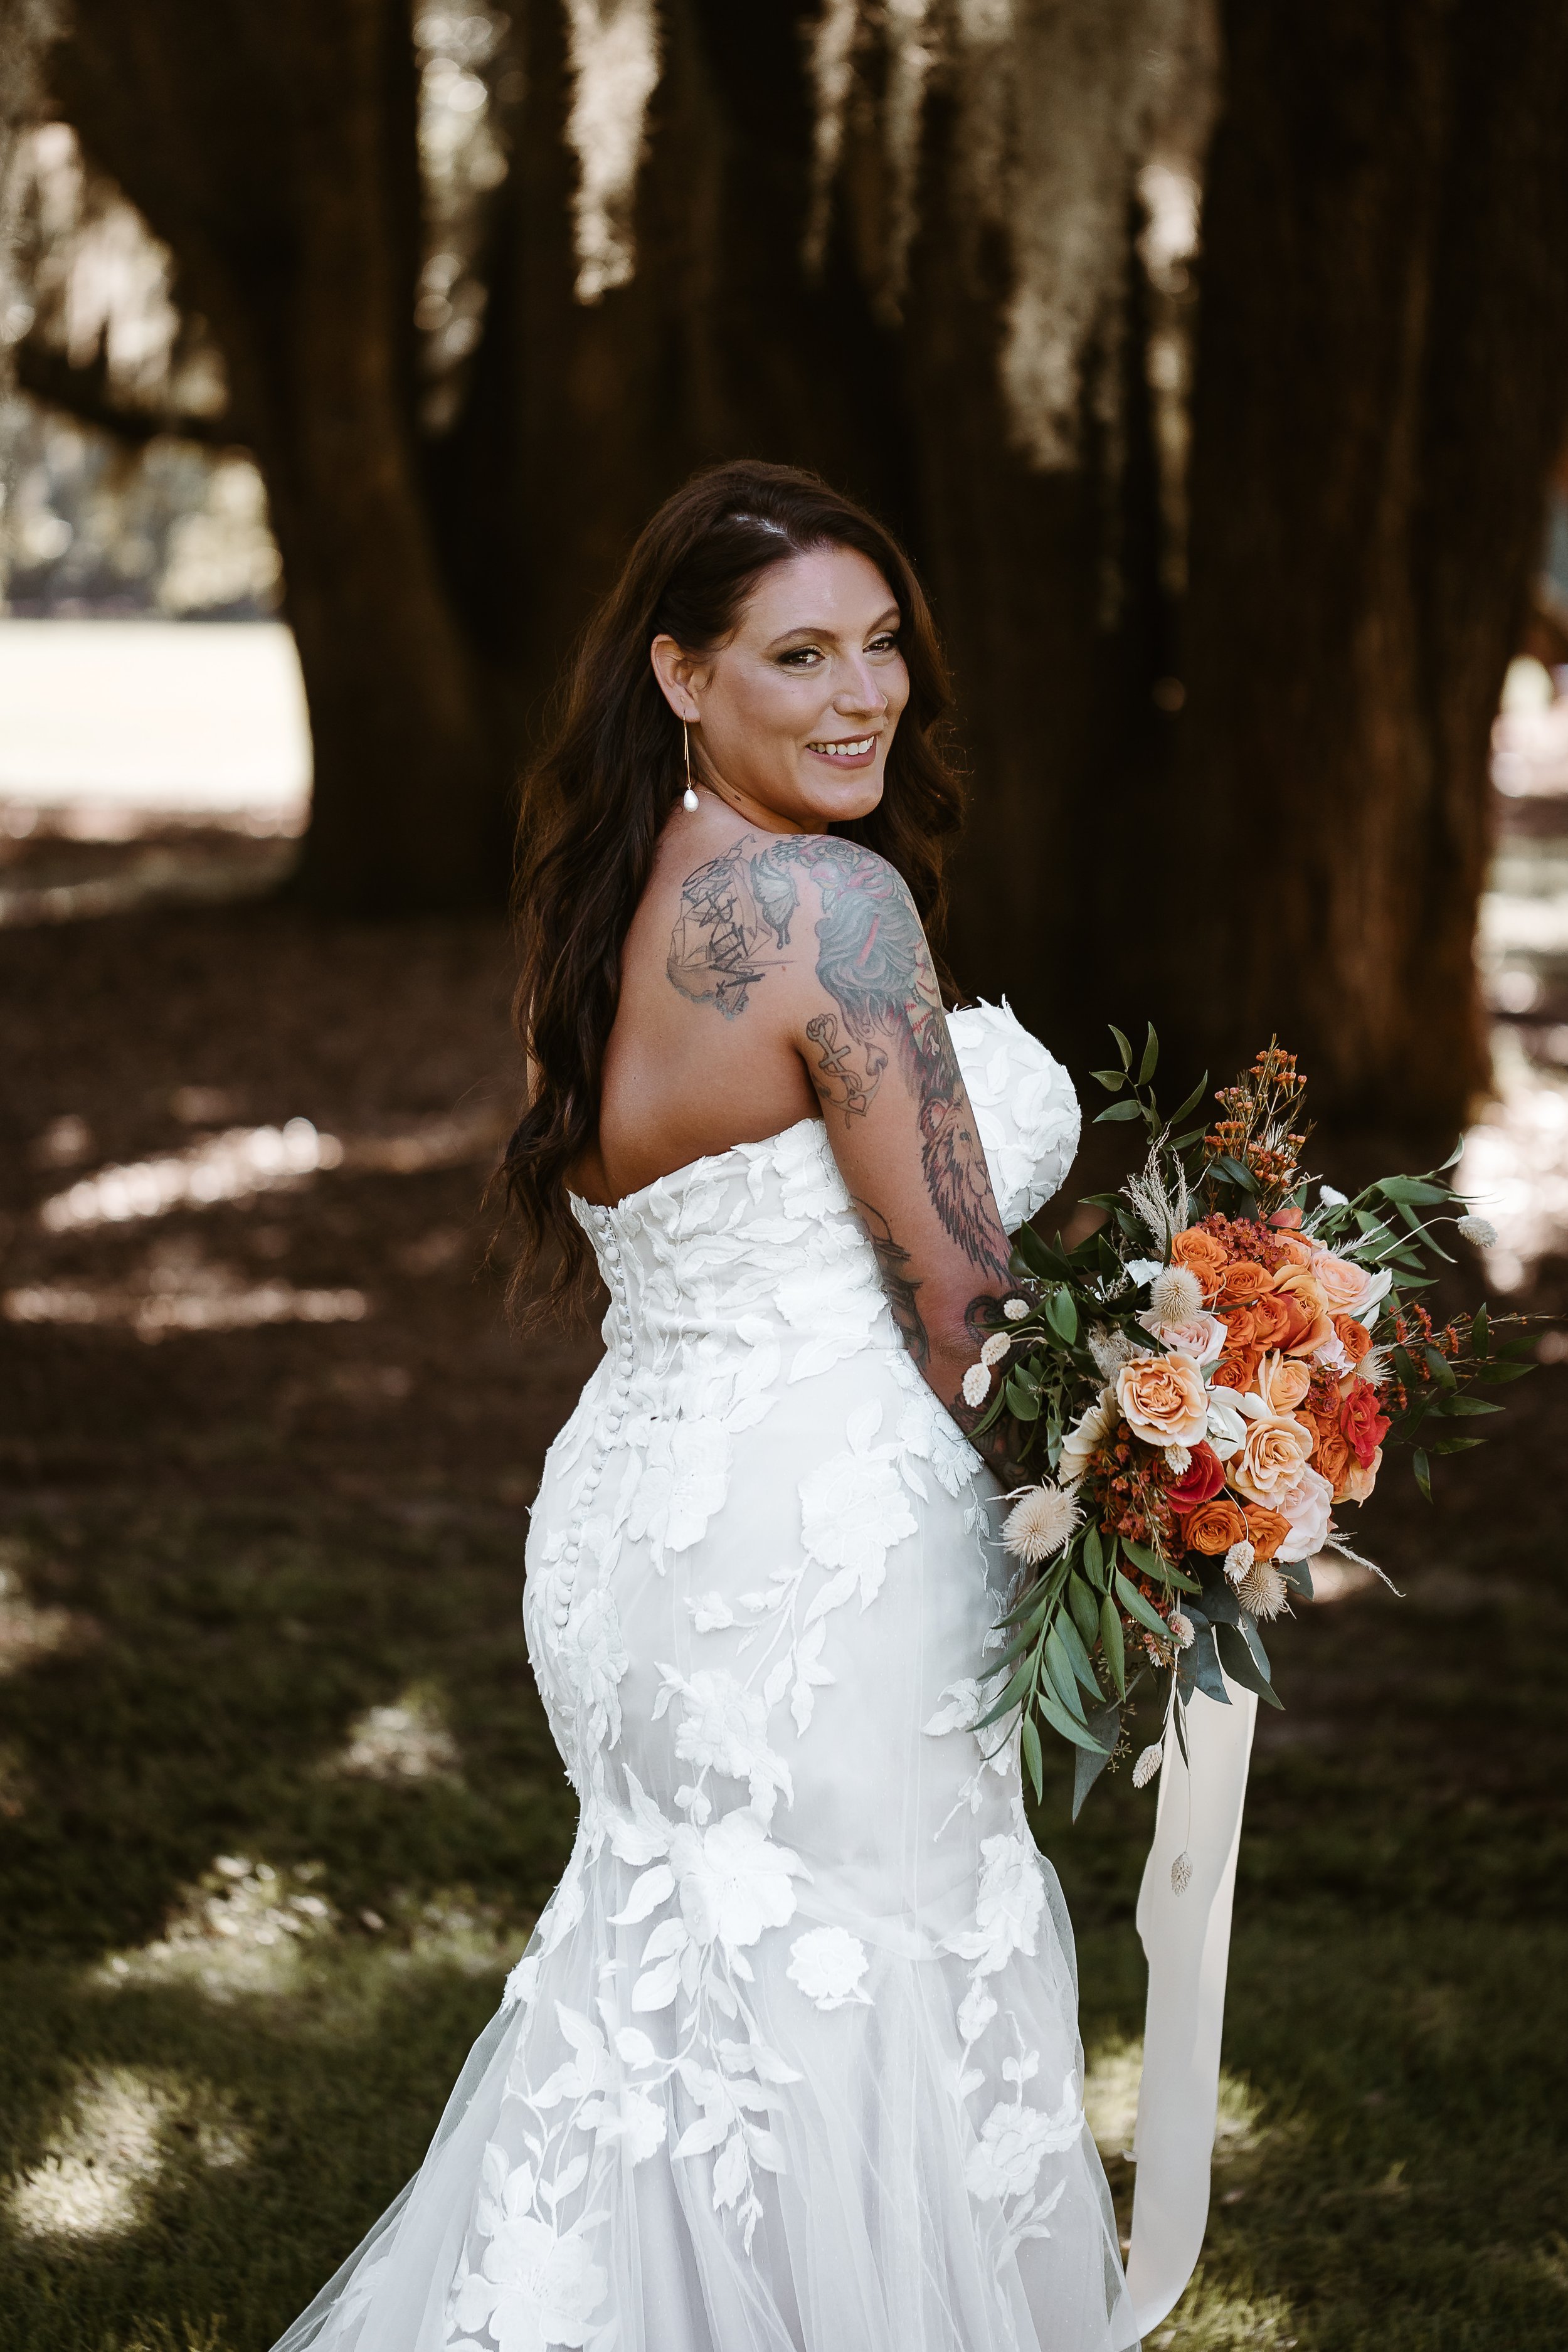 ivory-and-beau-blog-down-for-the-gown-real-bride-rebecca-ingram-wedding-dress-maggie-sottero-bridal-gown-strapless-wedding-dress-wedding-gown-savannah-bridal-shop-savannah-bridal-boutique-savannah-georgia-Annie & Cam Wedding-304.jpg